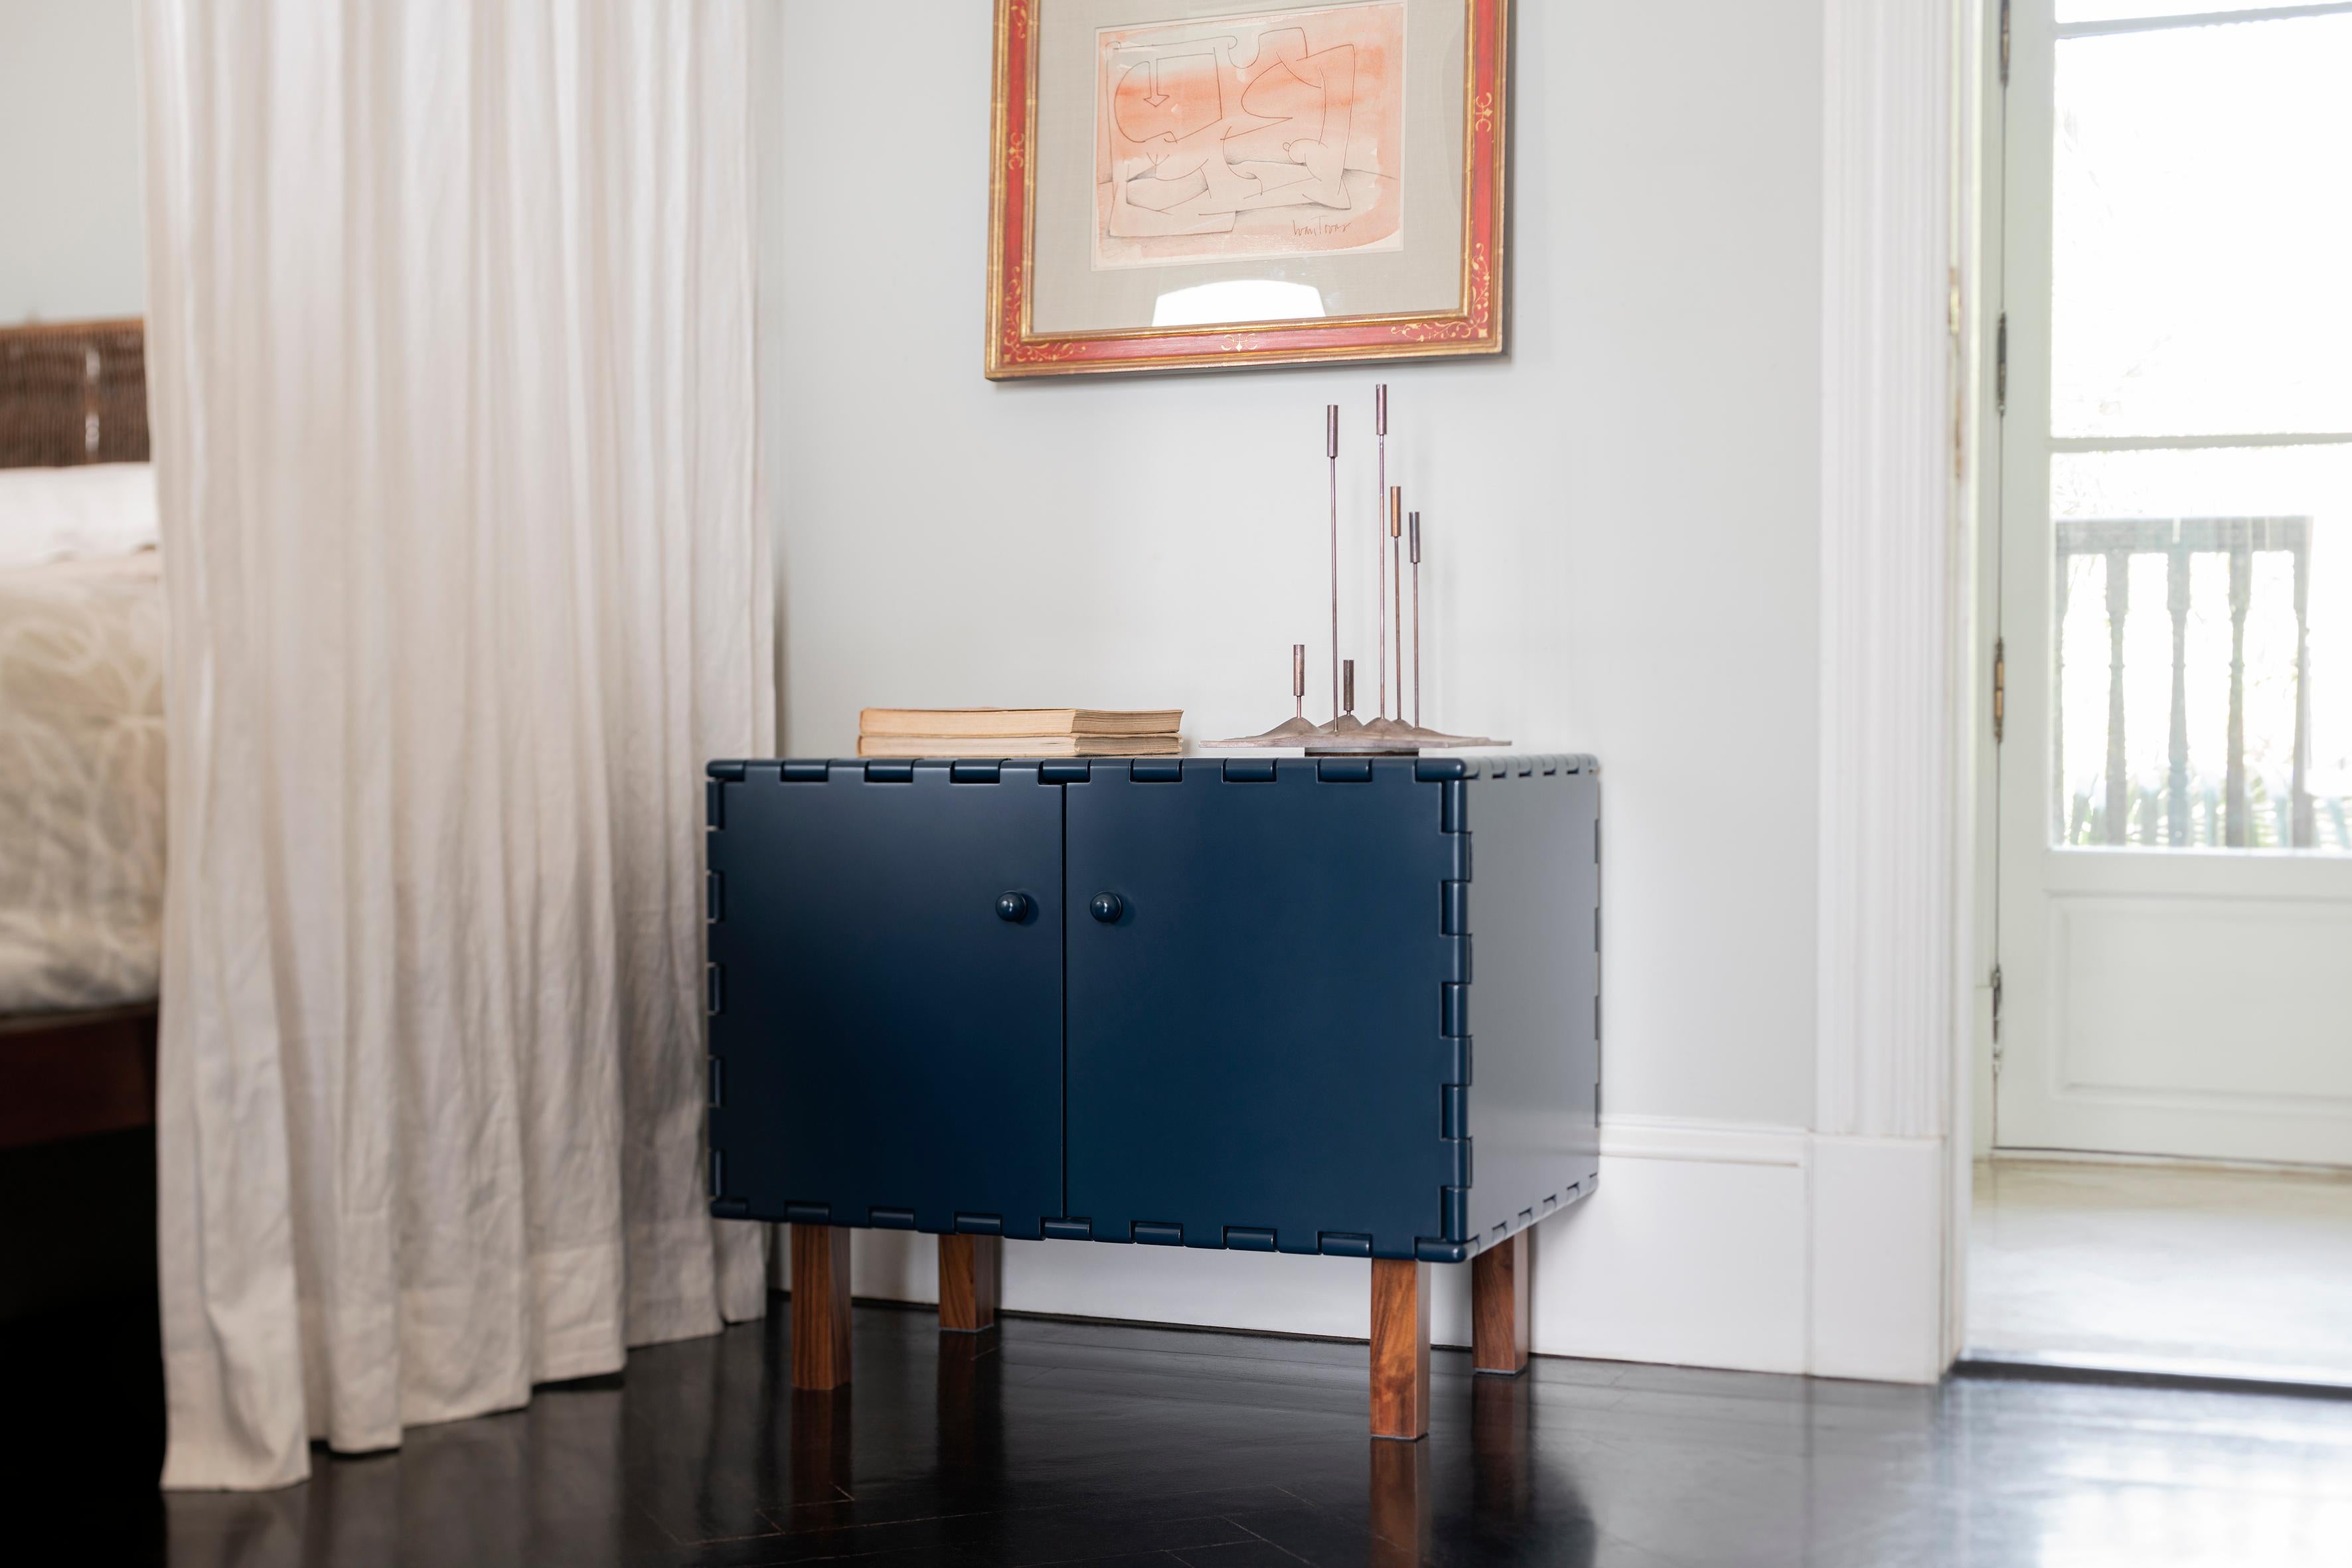 Handcrafted nightstand in lacquered wood. The lacquer color highlights the simplicity of the design. The modular quality of the collection allows each cabinet to be combined with other pieces within the collection to create different